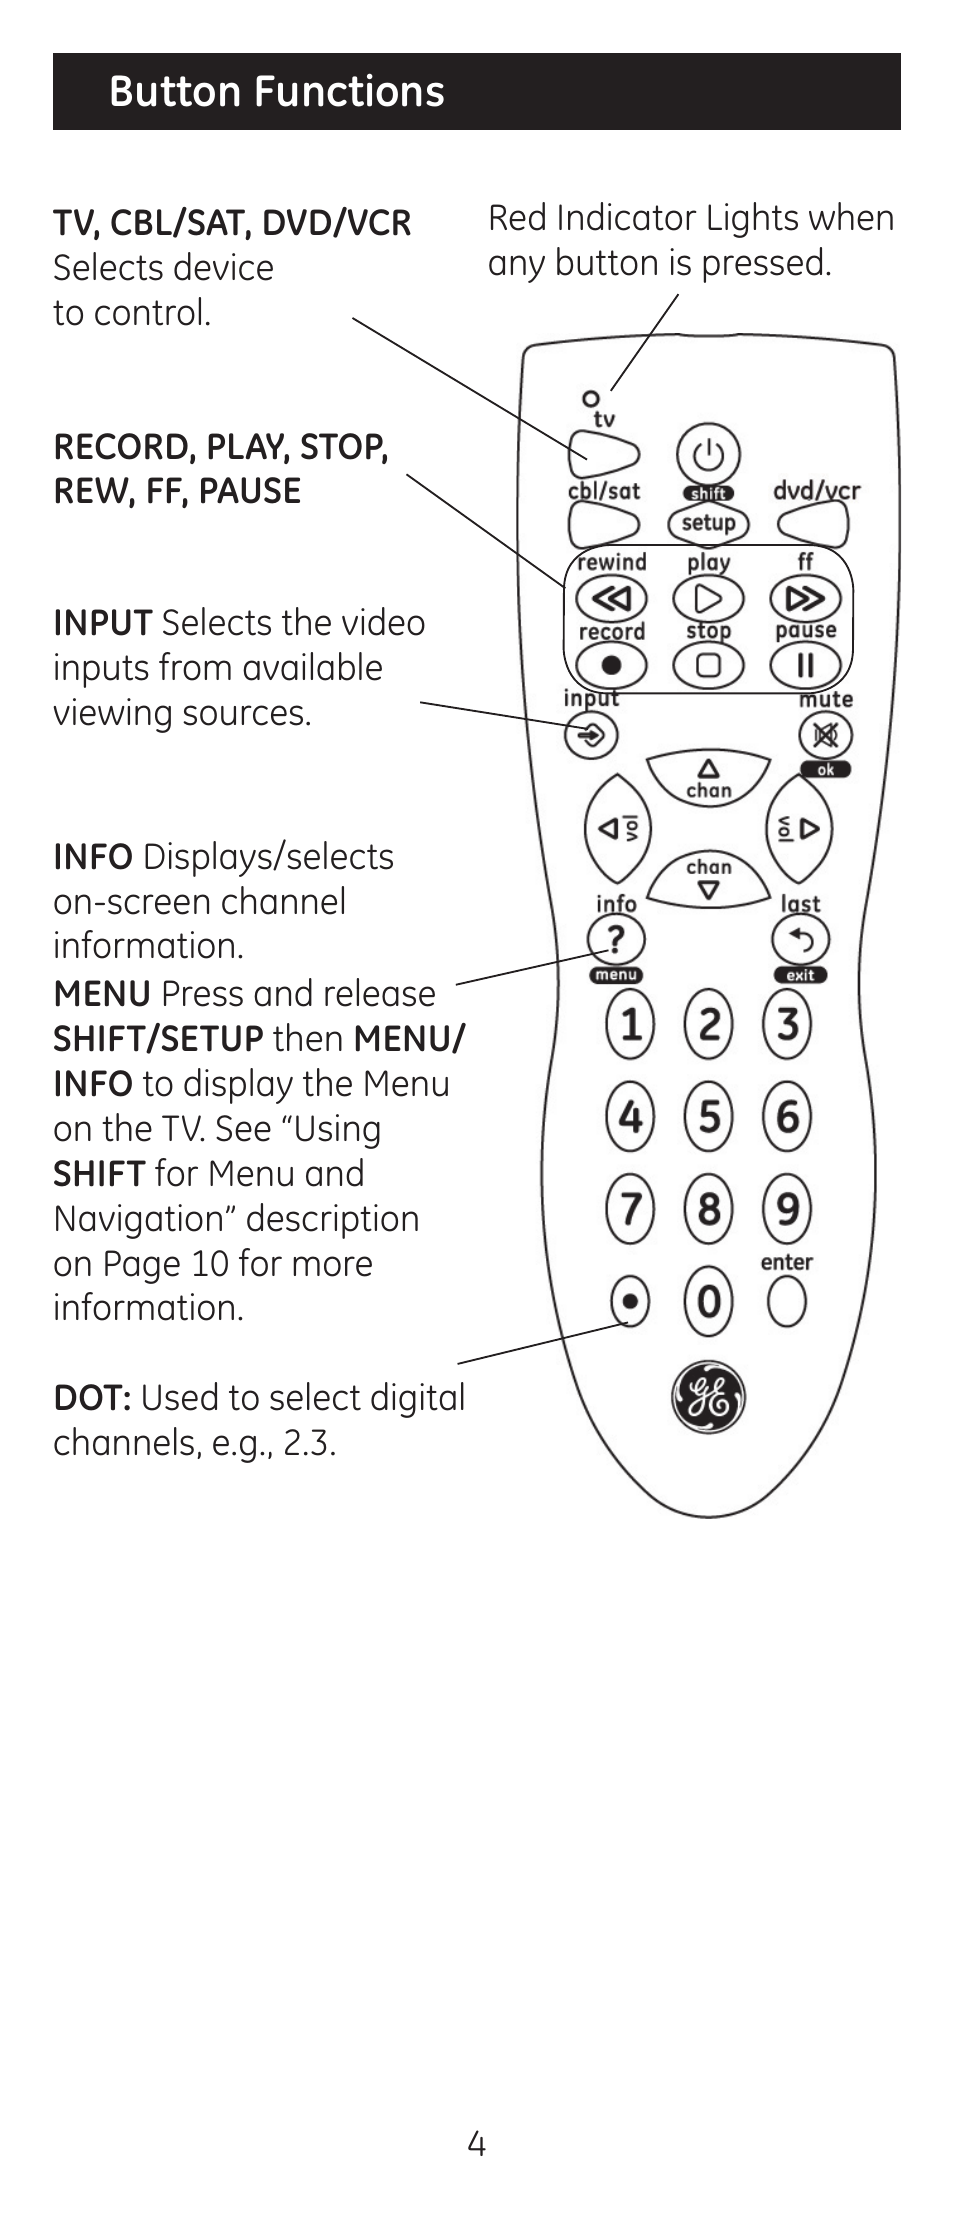 Button functions | GE 24911-v2 GE Universal Remote User Manual | Page 4